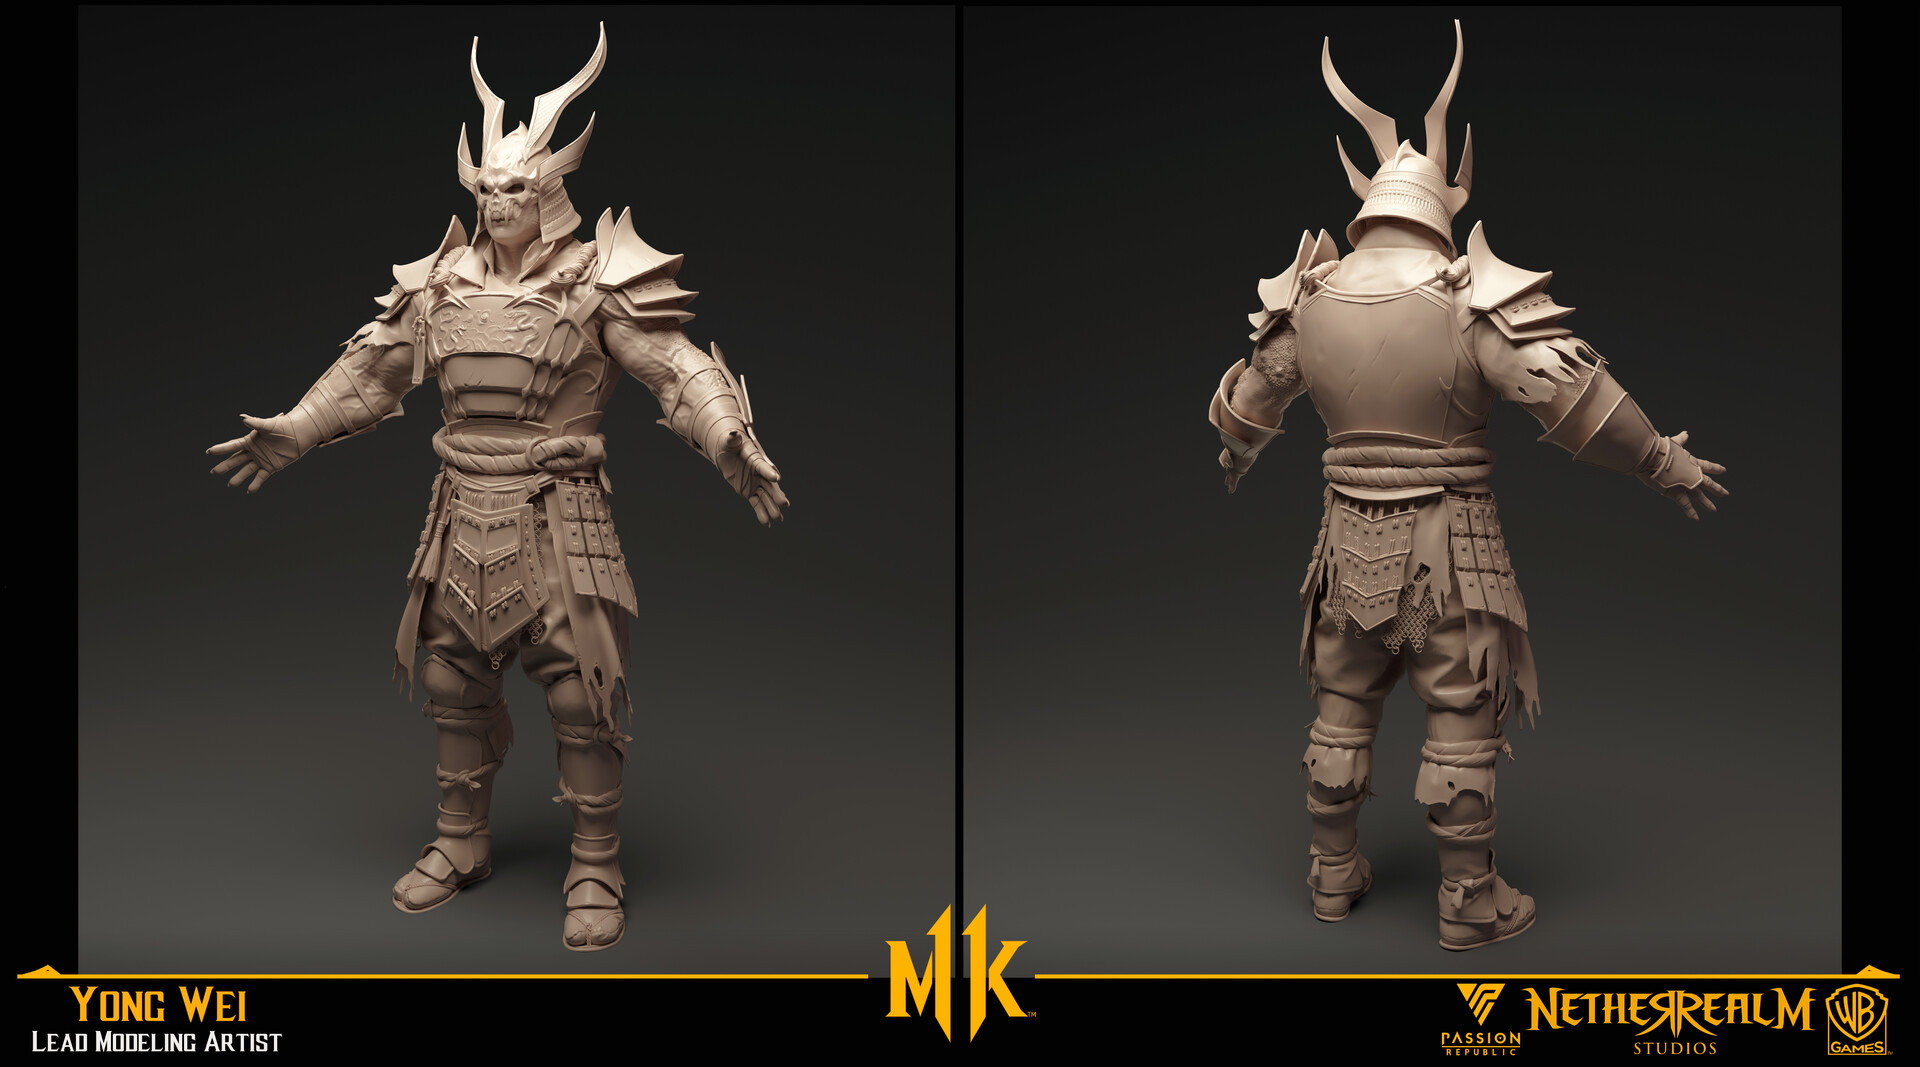 Shao Kahn from Mortal Kombat, Game Art, Cosplays and more